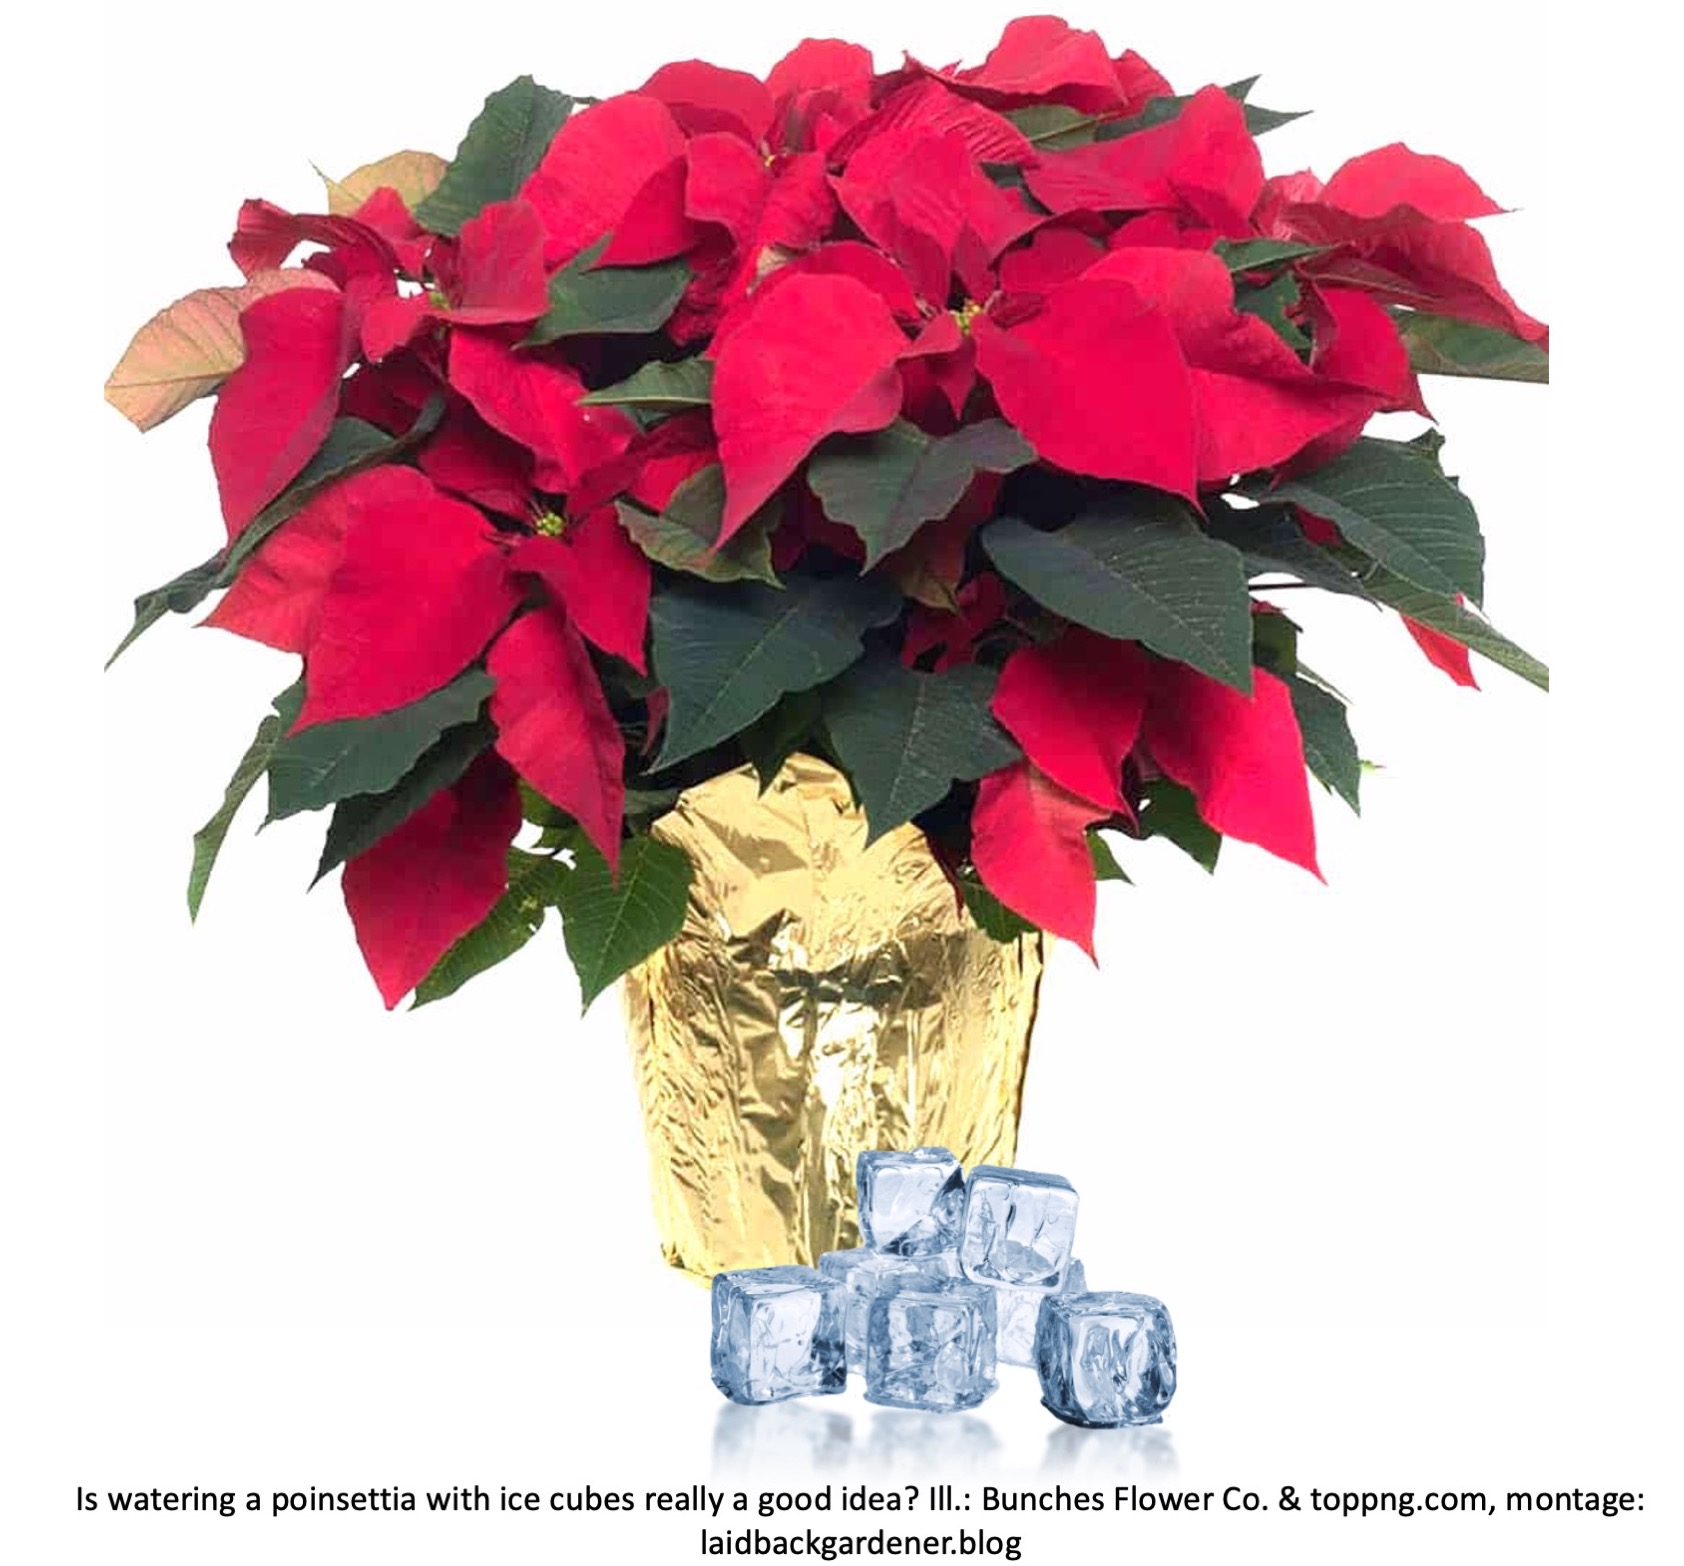 Poinsettia in pot with ice cubes in front